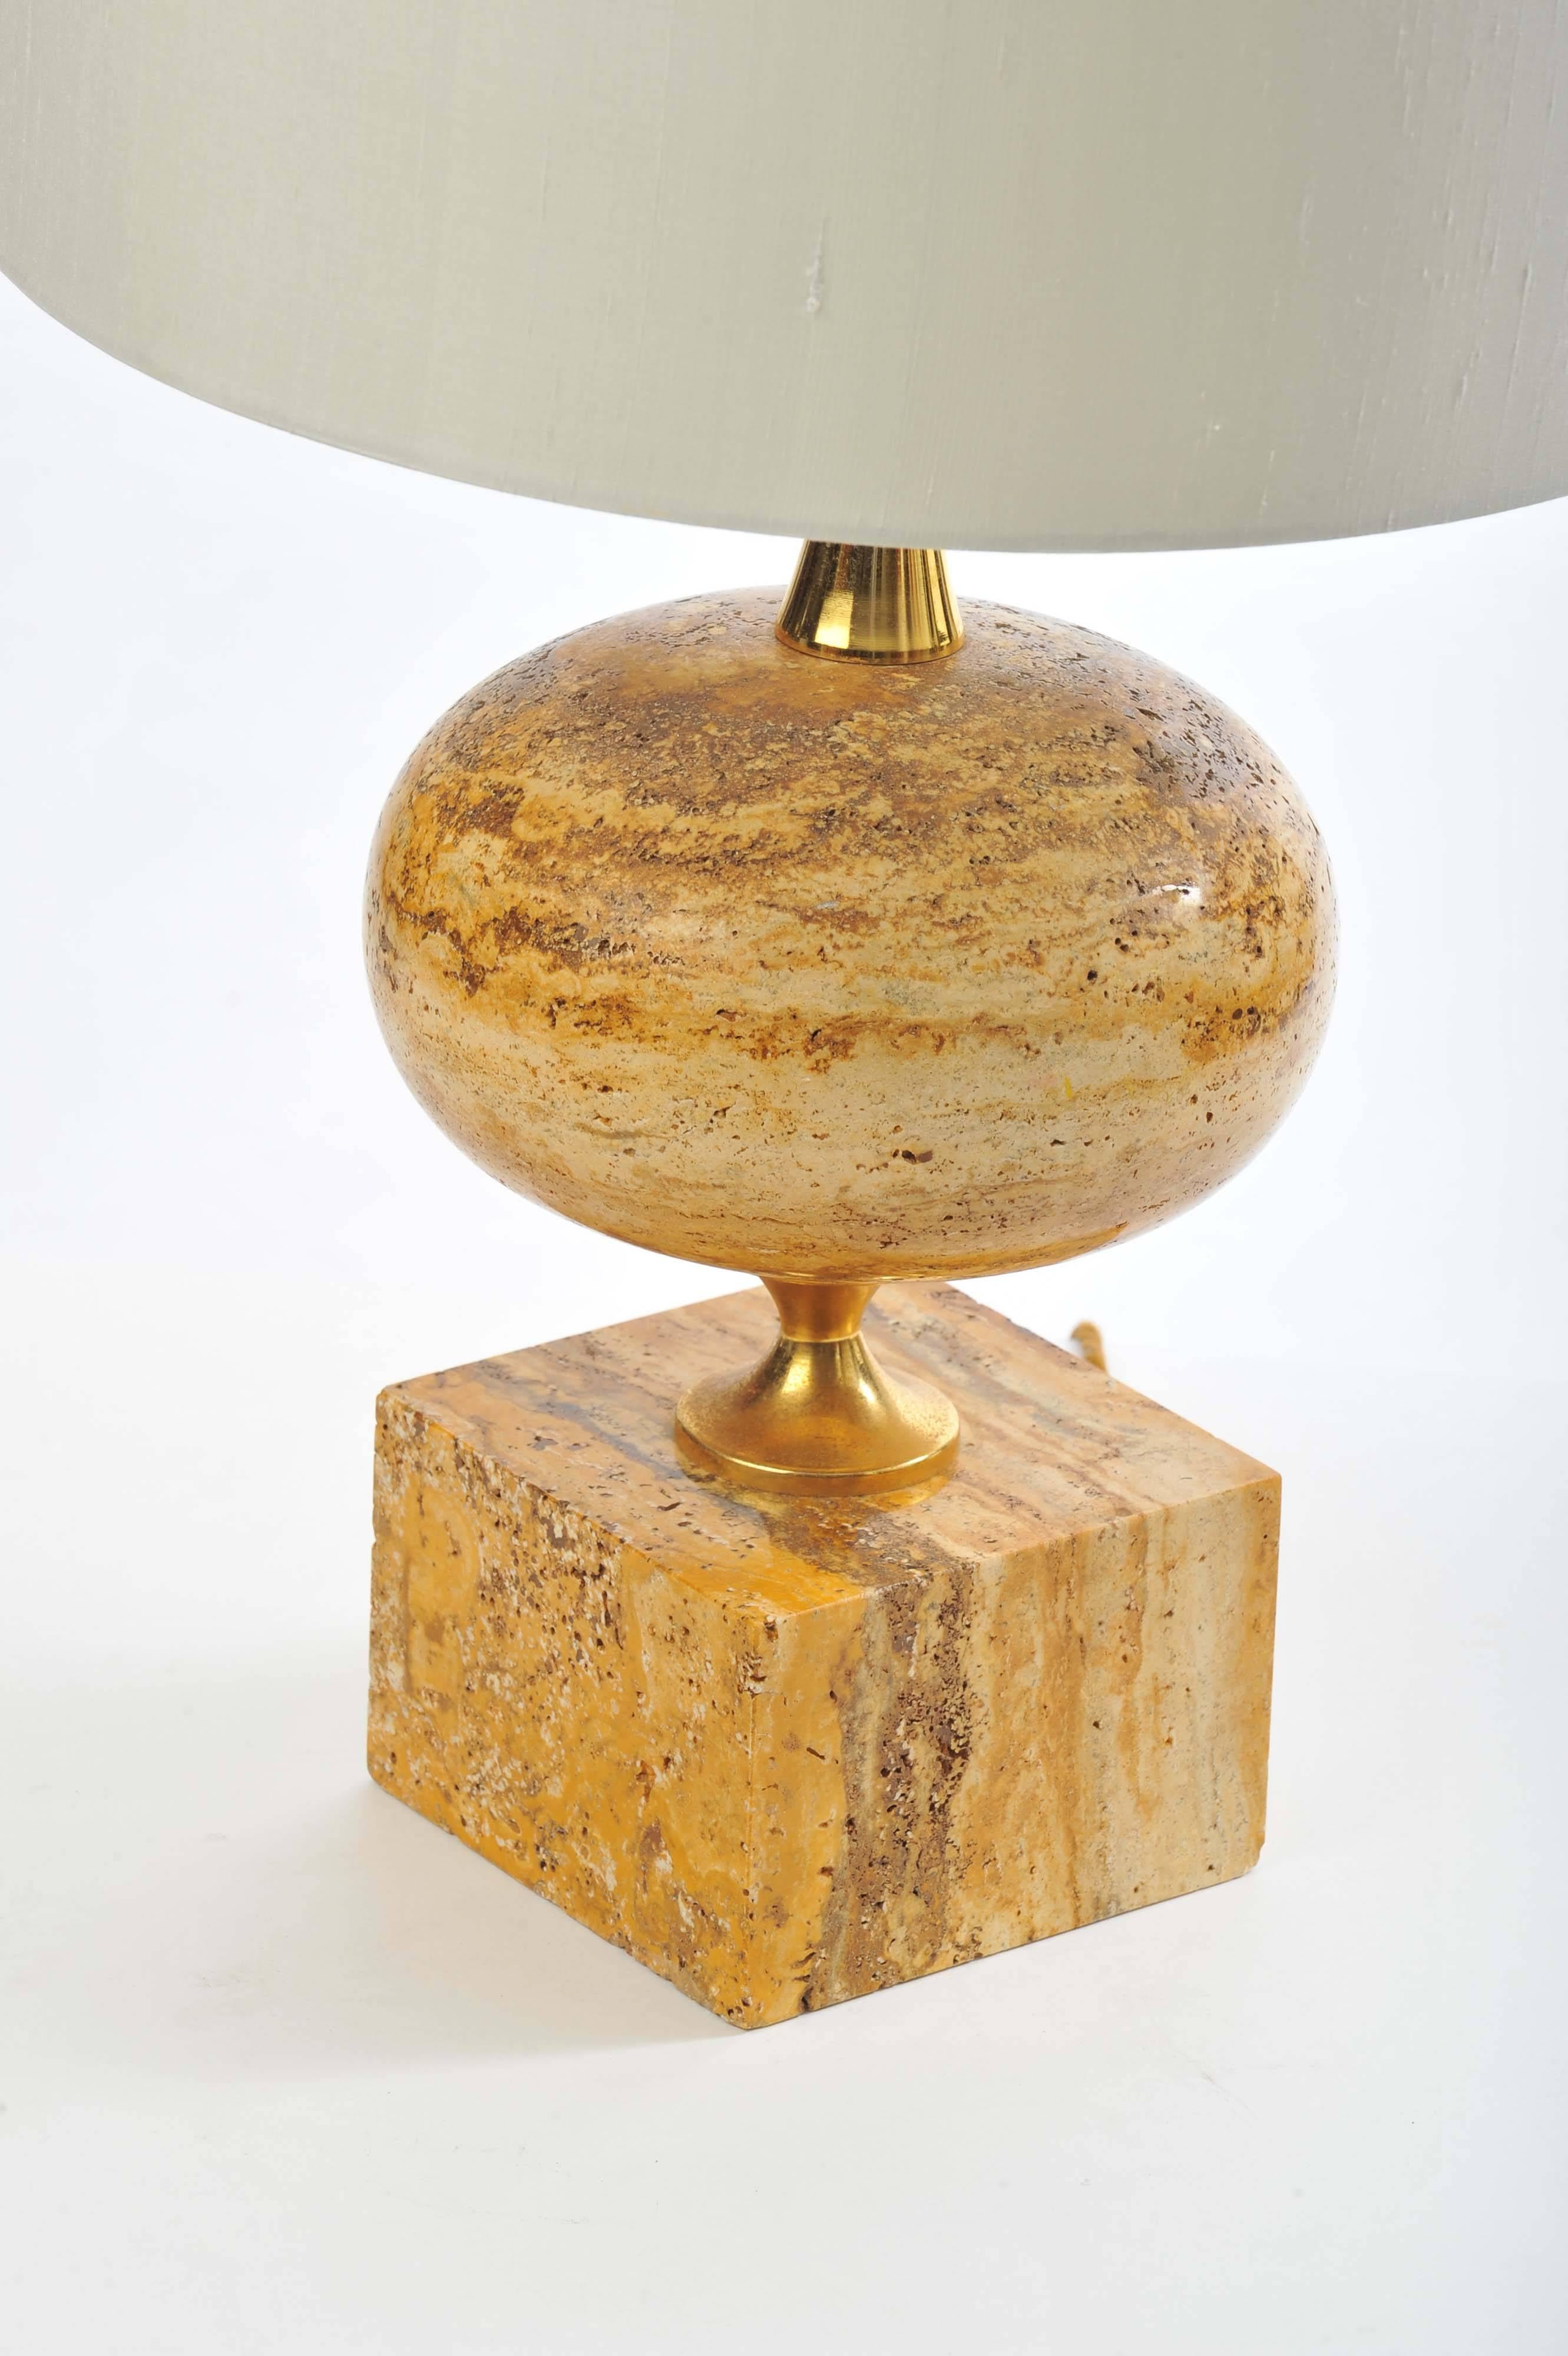 Curvaceous lamp in polished travertine stone, build up in layers of cream, orange, rusty brown tones, created from the geothermal springs. The Travertine contrasts well with the brass supports and the cream silk lamp shade.